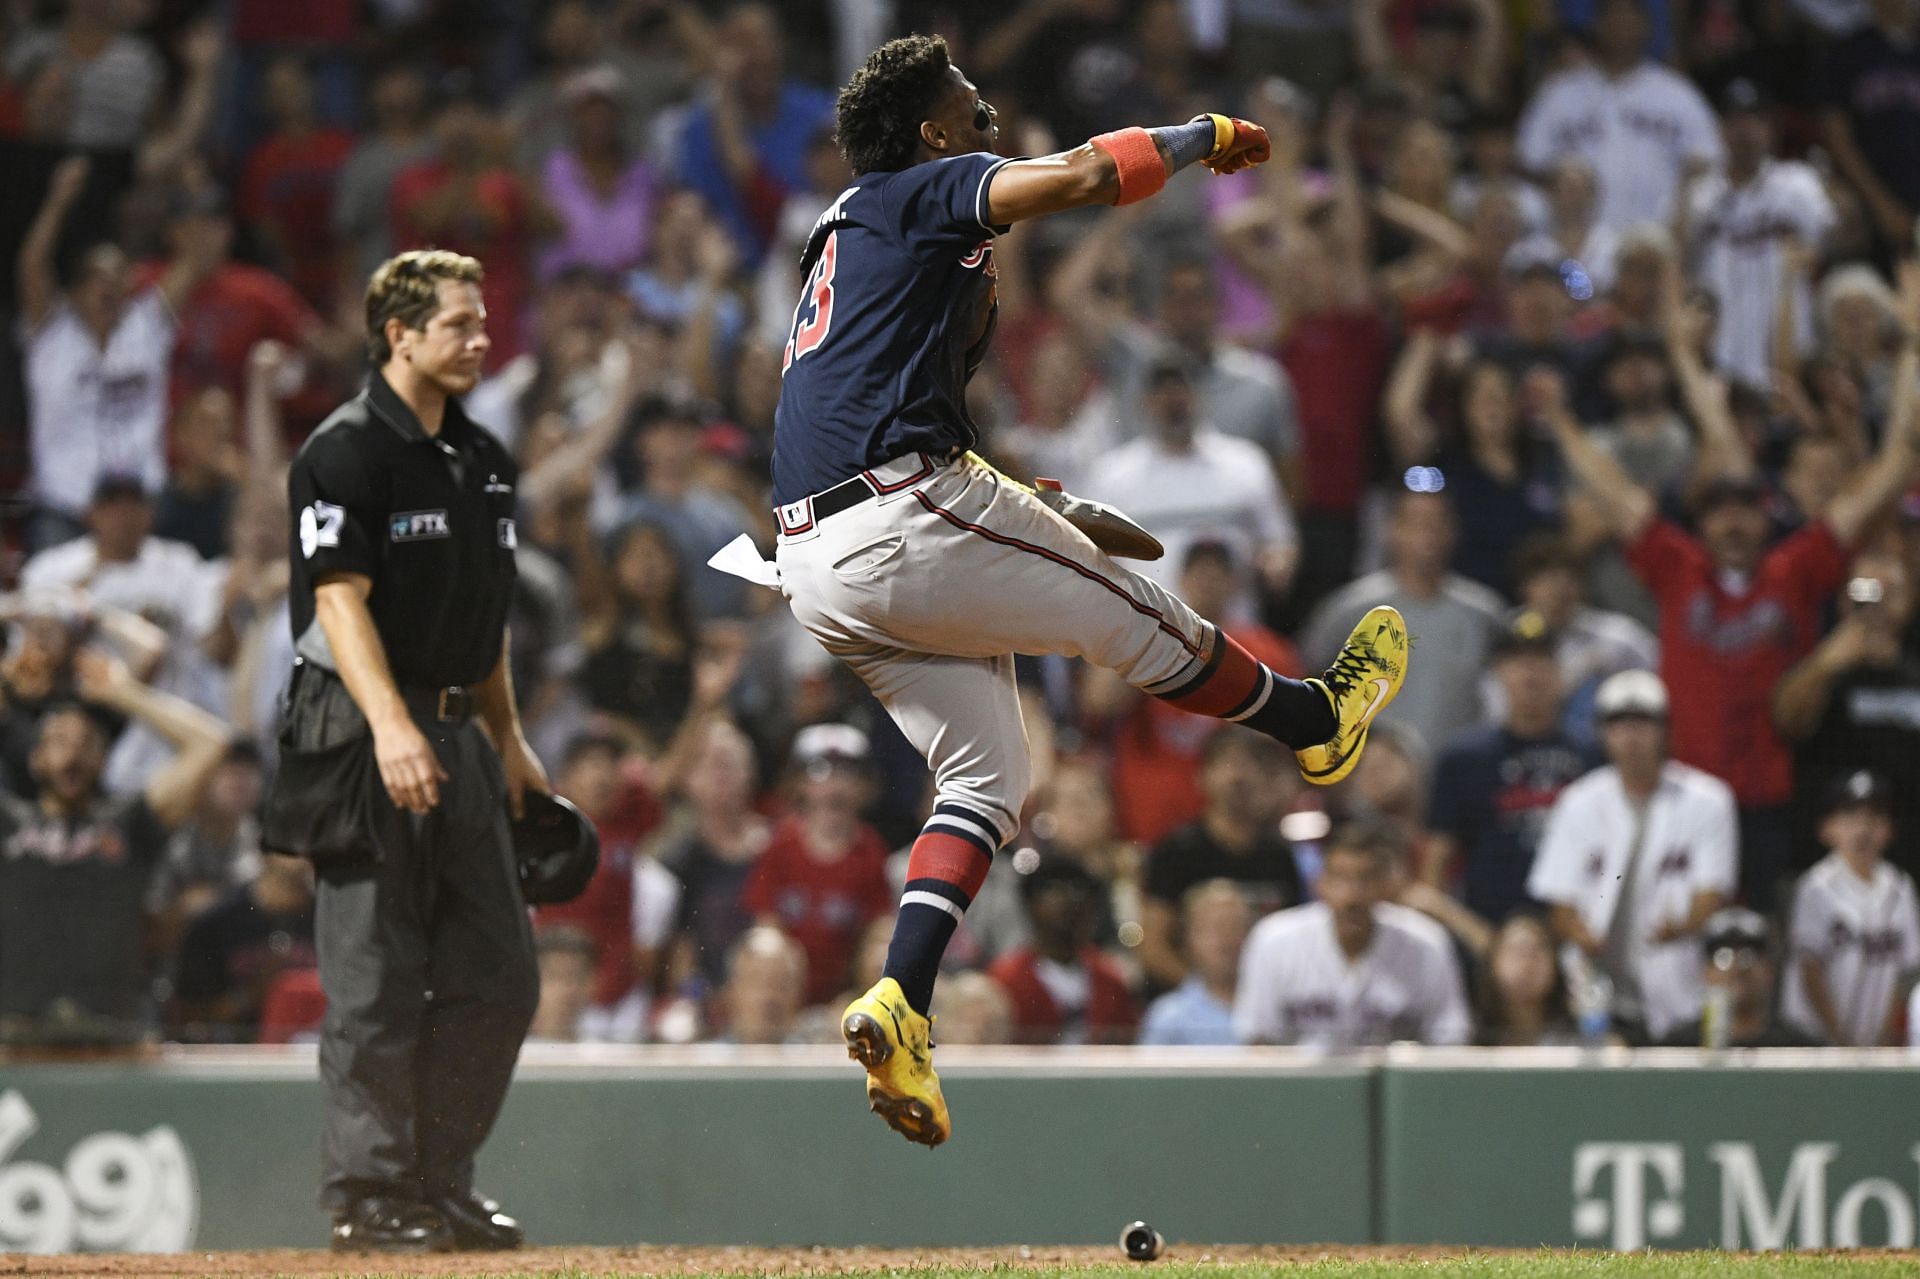 After an abysmal July, Ronald Acuna Jr. is rolling in August.